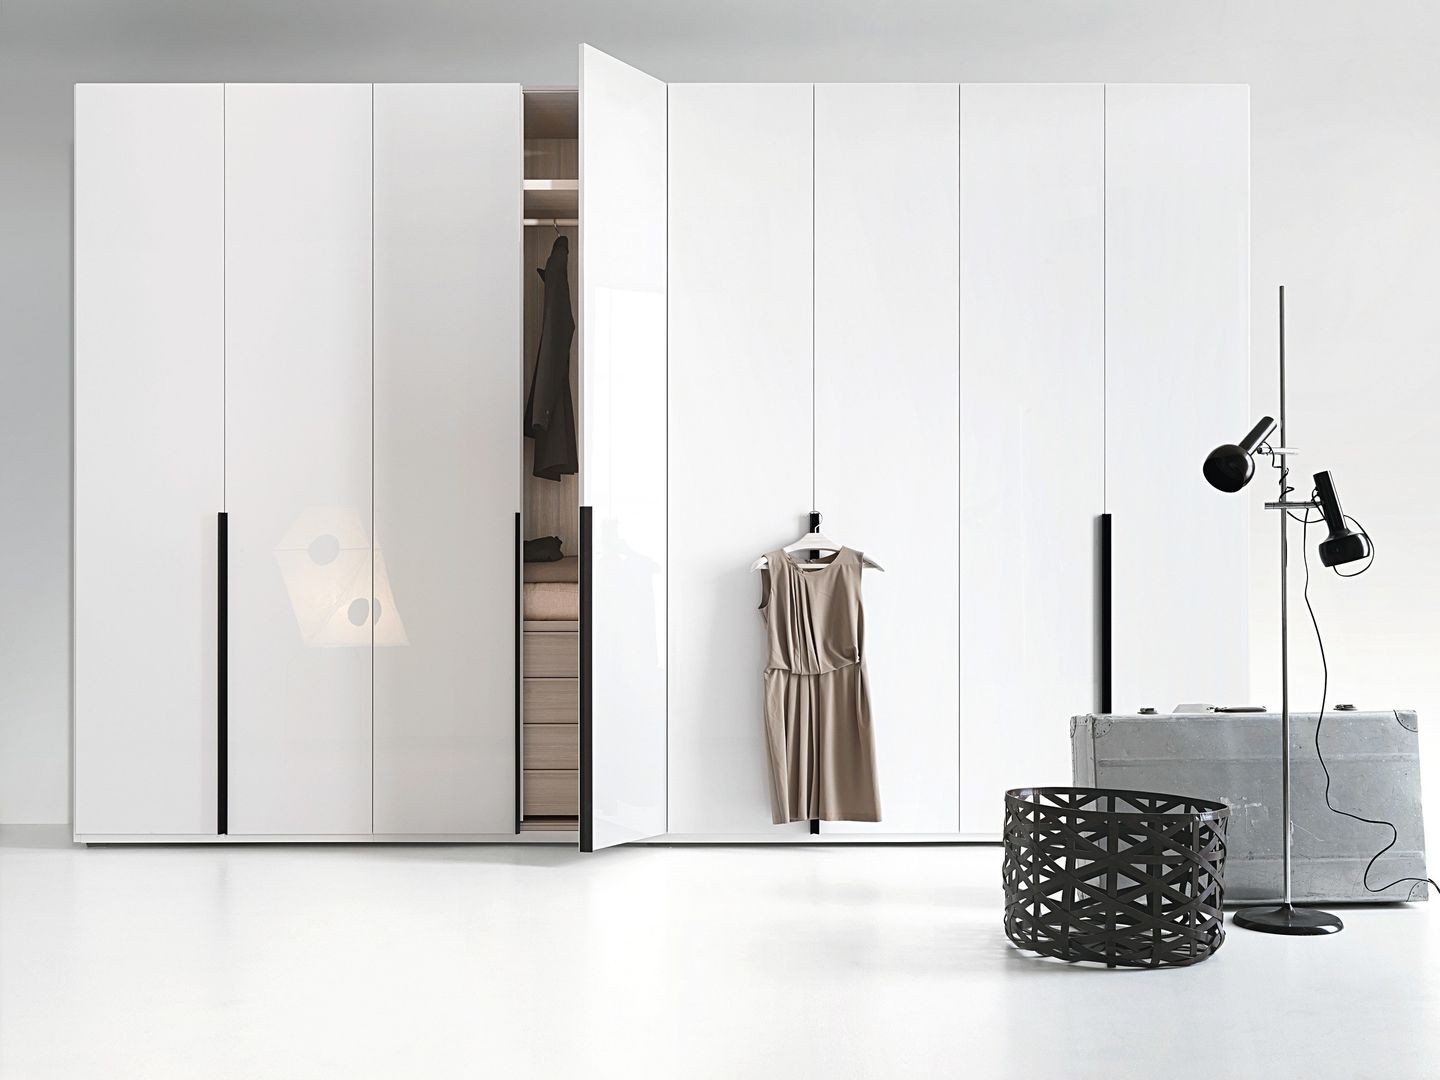 Who have invented closet??, Mobilificio Marchese Mobilificio Marchese ห้องเก็บของ ที่เก็บของ